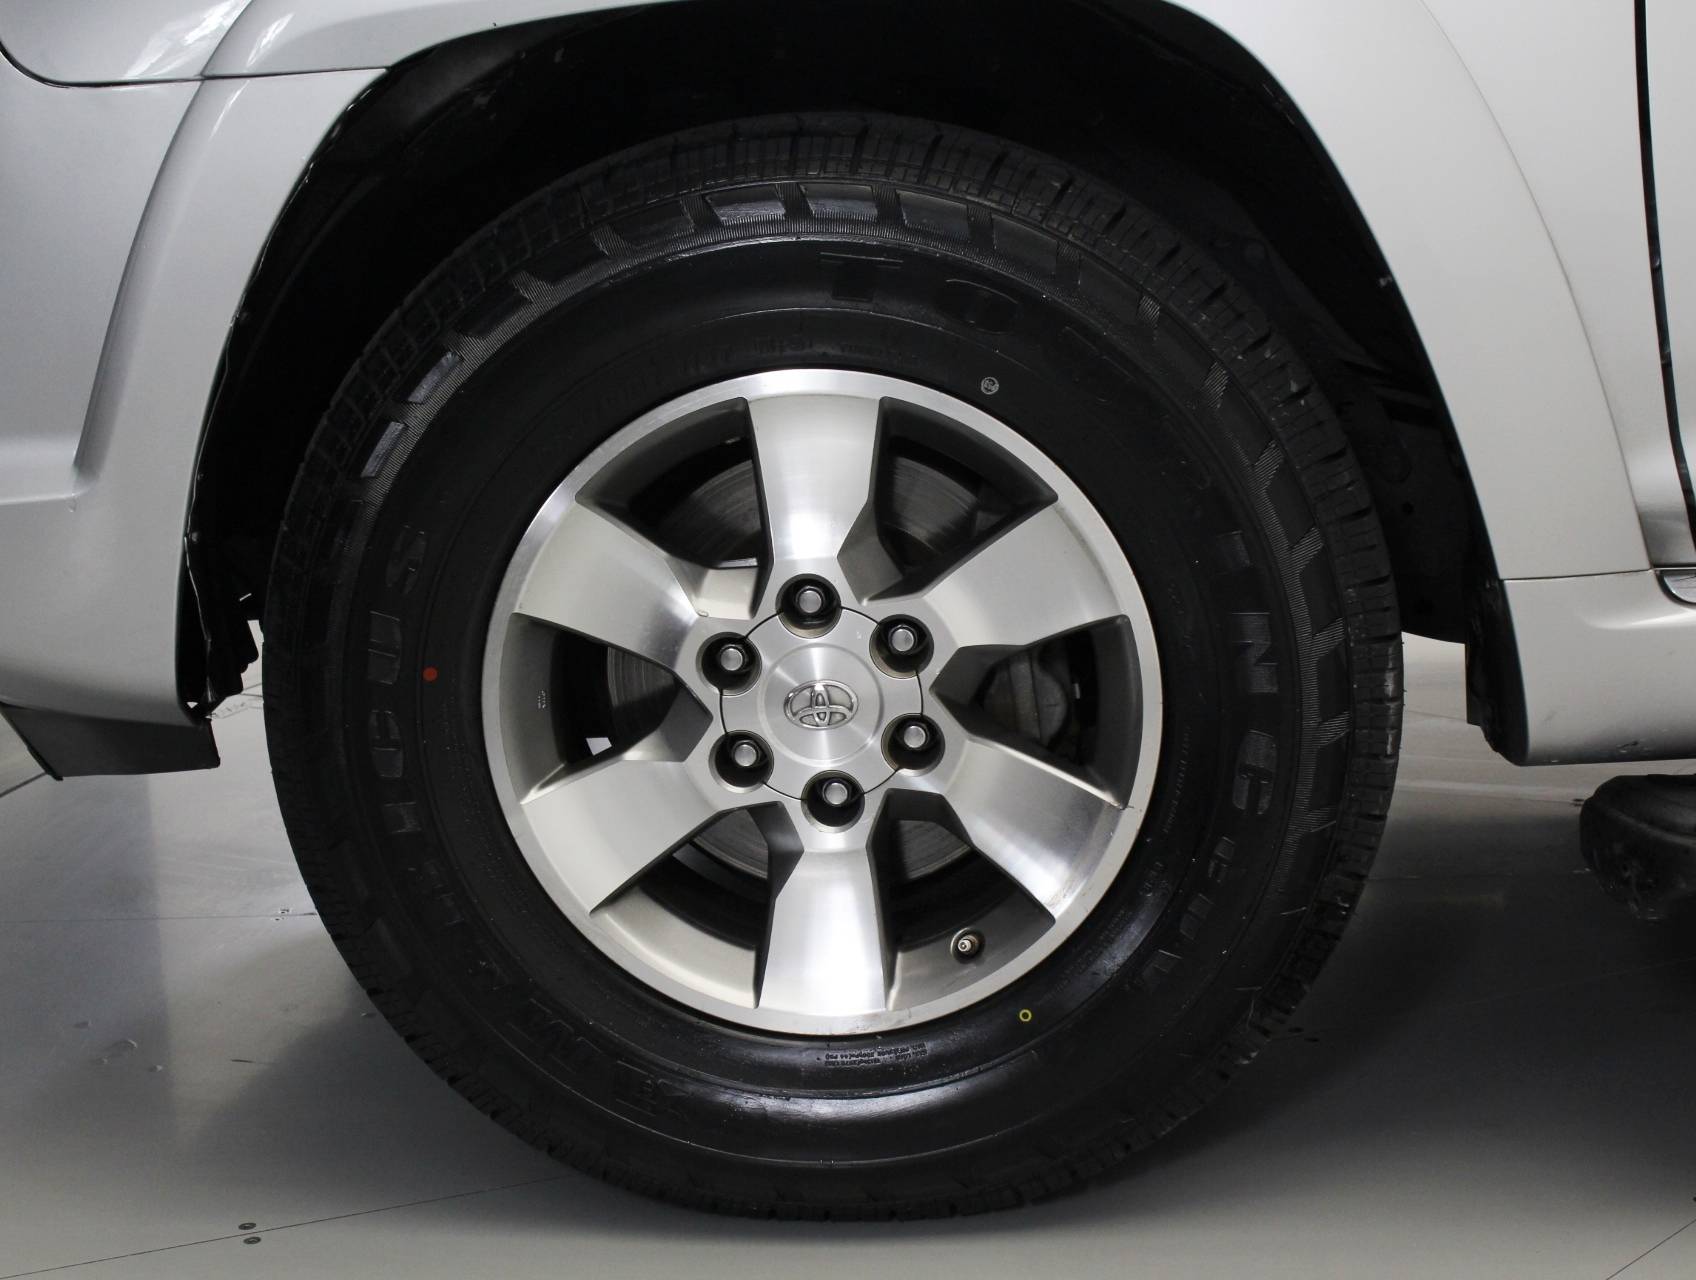 Florida Fine Cars - Used TOYOTA 4RUNNER 2011 WEST PALM SR5